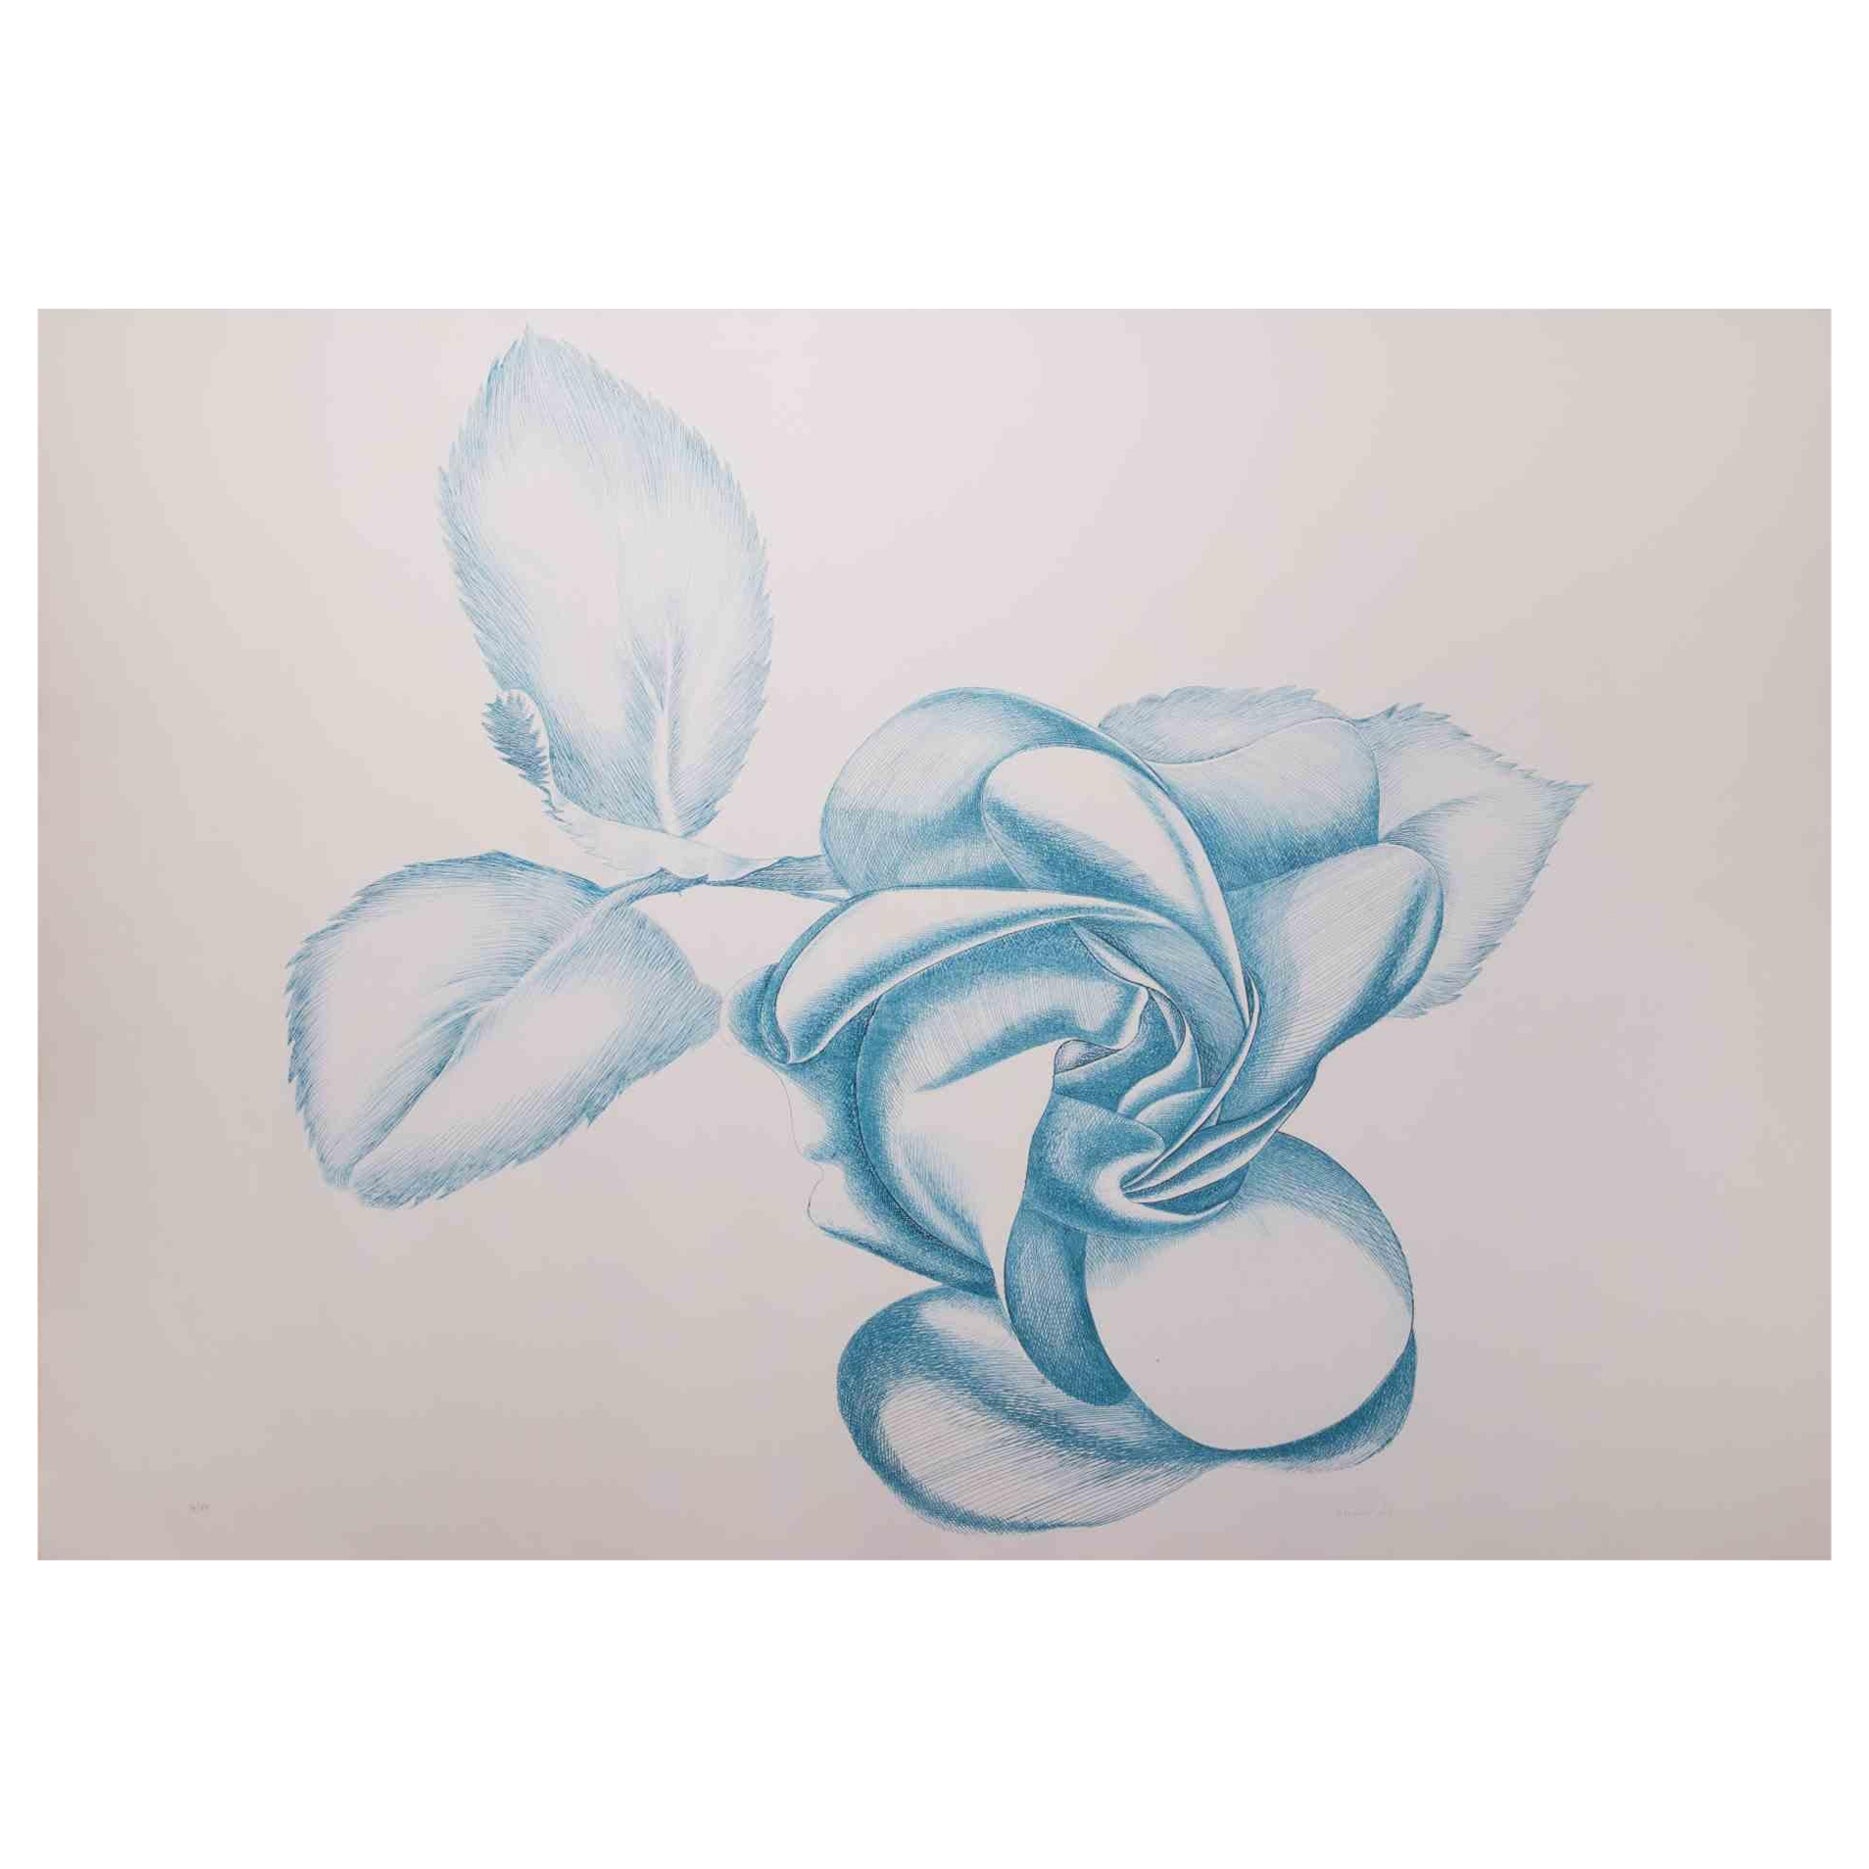 Blue Rose is a contemporary artwork realized by Giacomo Porzano in 1970s.

Colored etching

Hand-signed on the lower right.

Numbered on the lower left.

Edition 14/50

Giacomo Porzano was born in Lerici on November 21, 1925 and died in Pescosolido